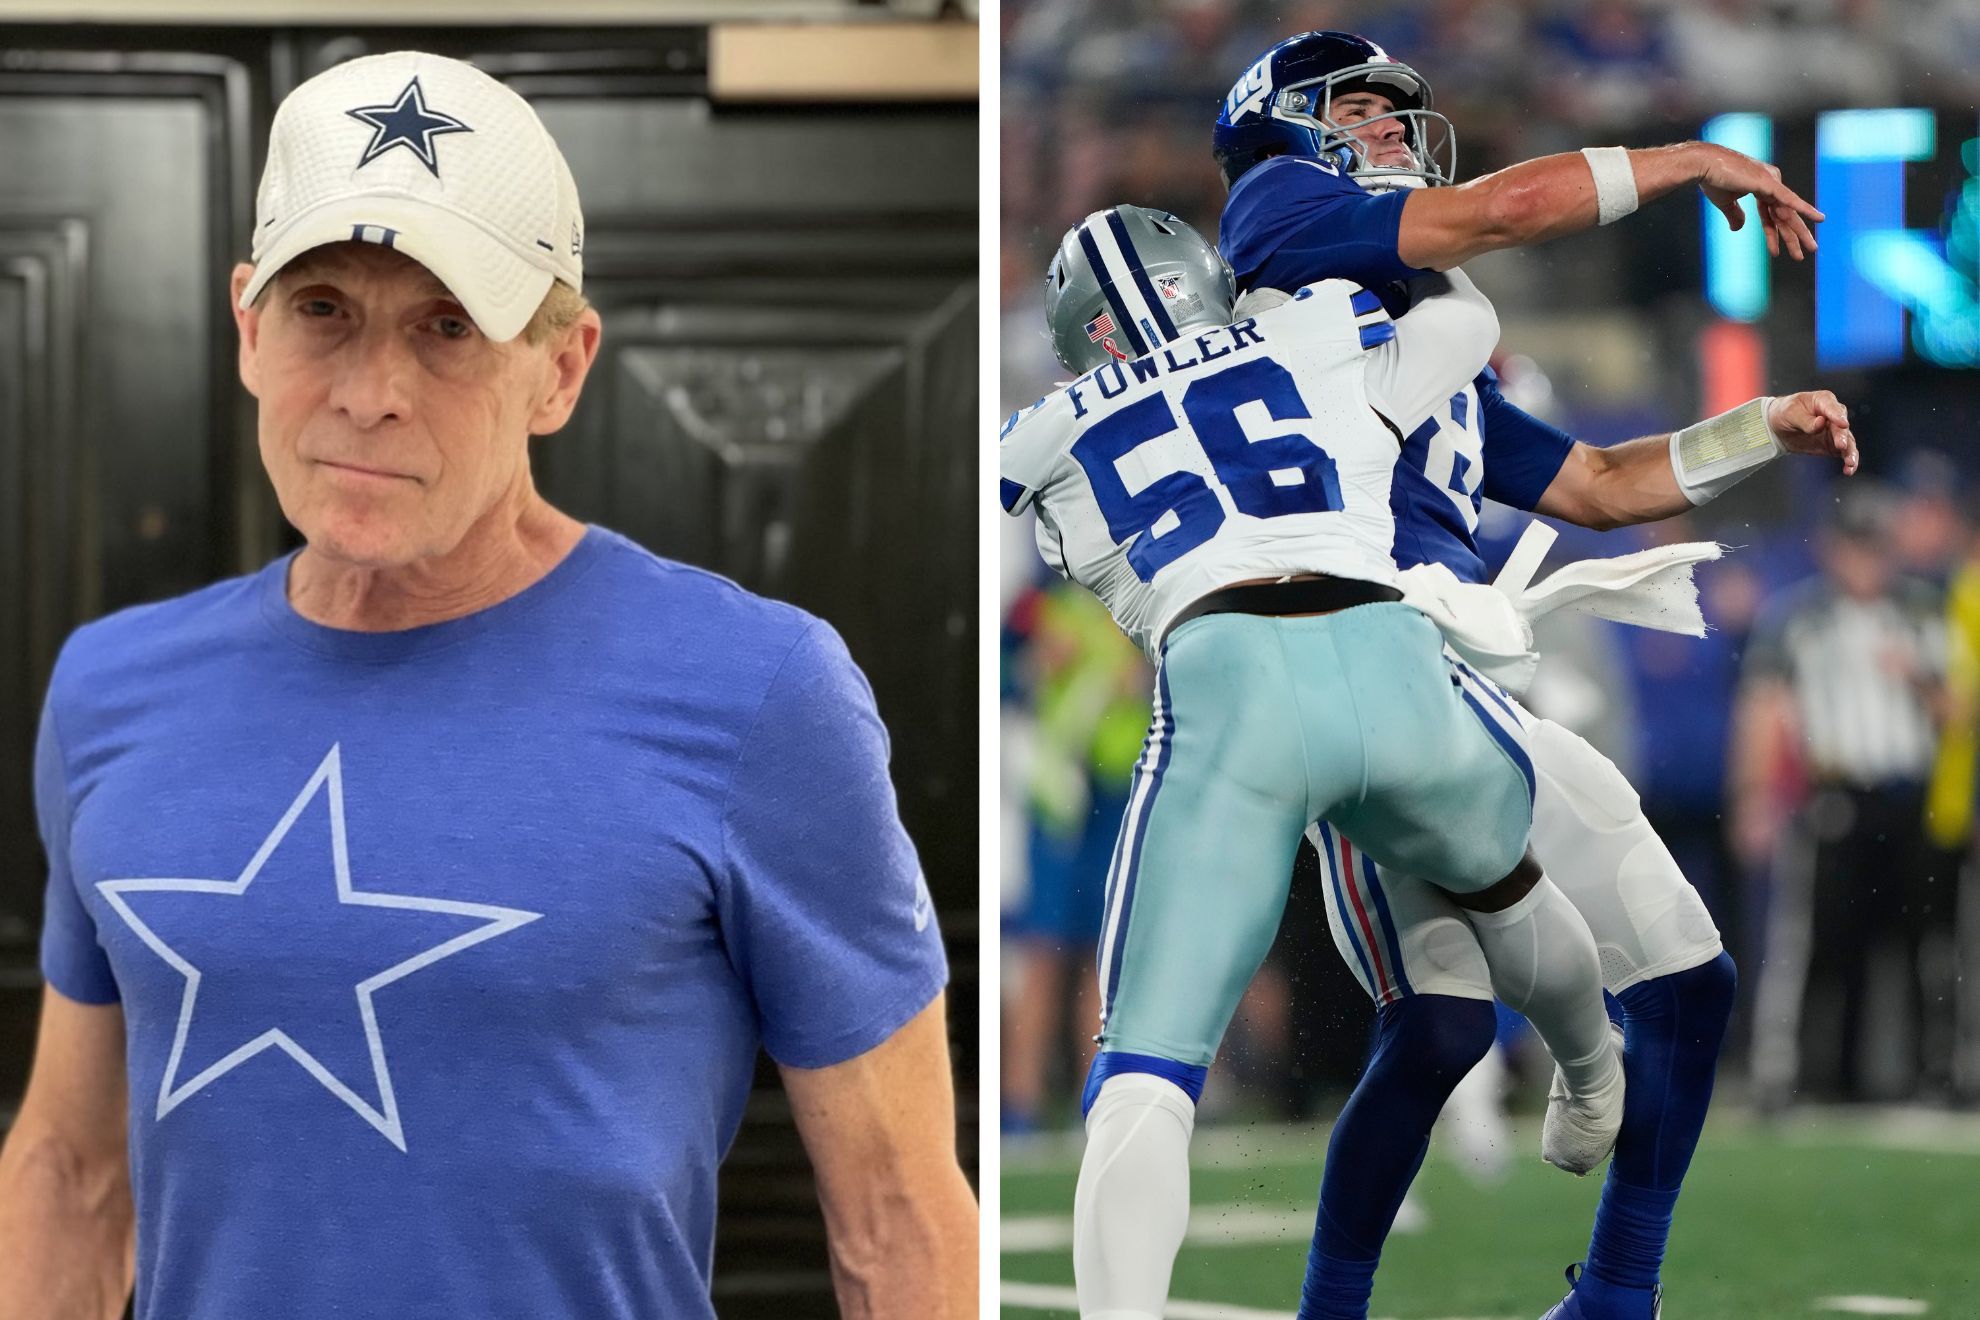 Skip Bayless trolls Giants fans during his live commentary of Cowboys win